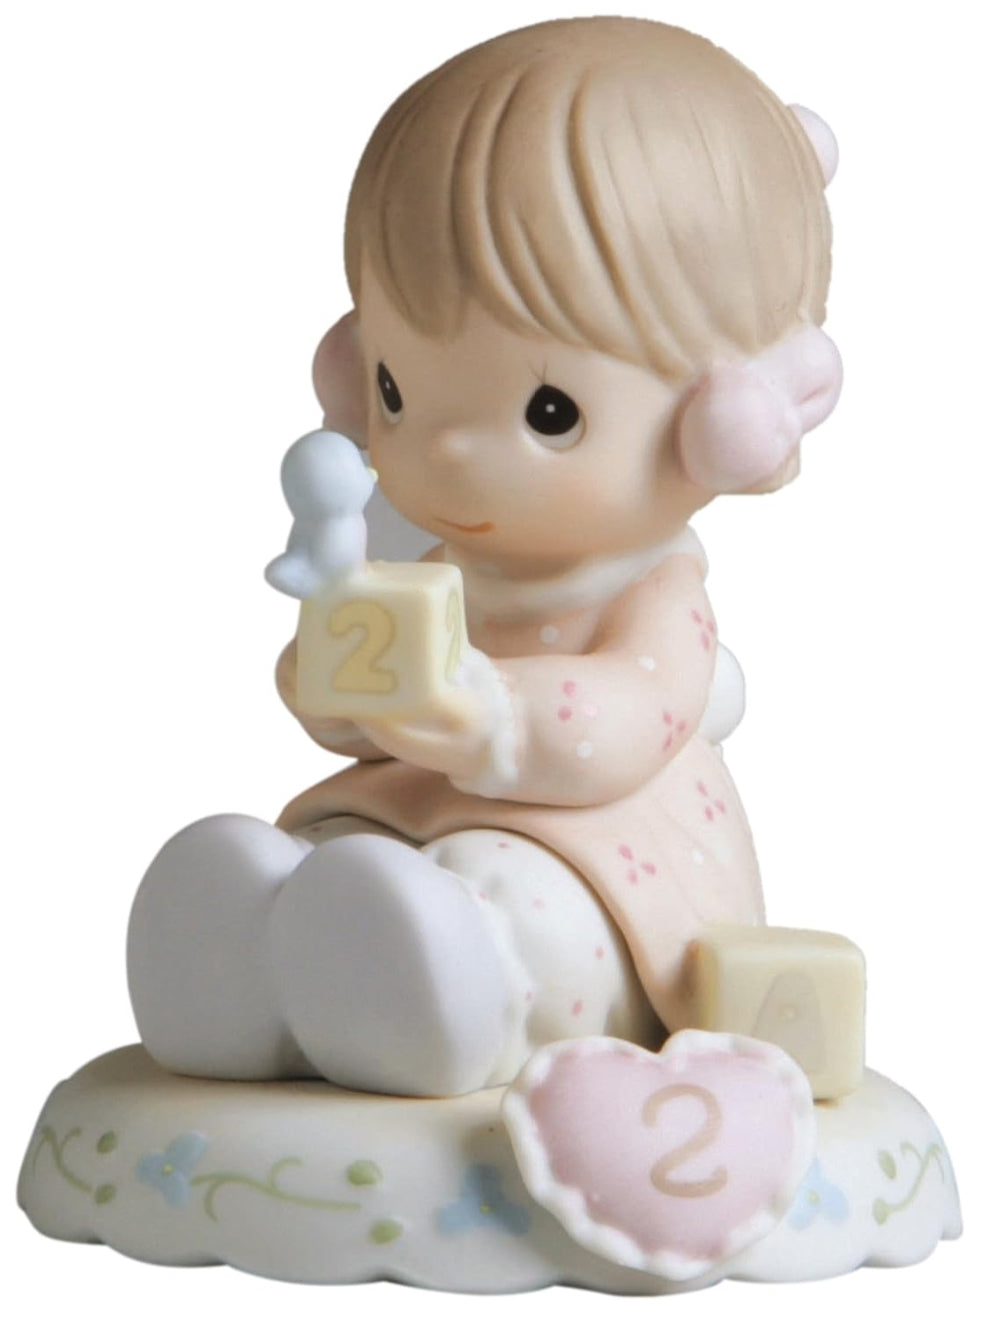 Growing in Grace Age 2 - Precious Moment Figurine 136212